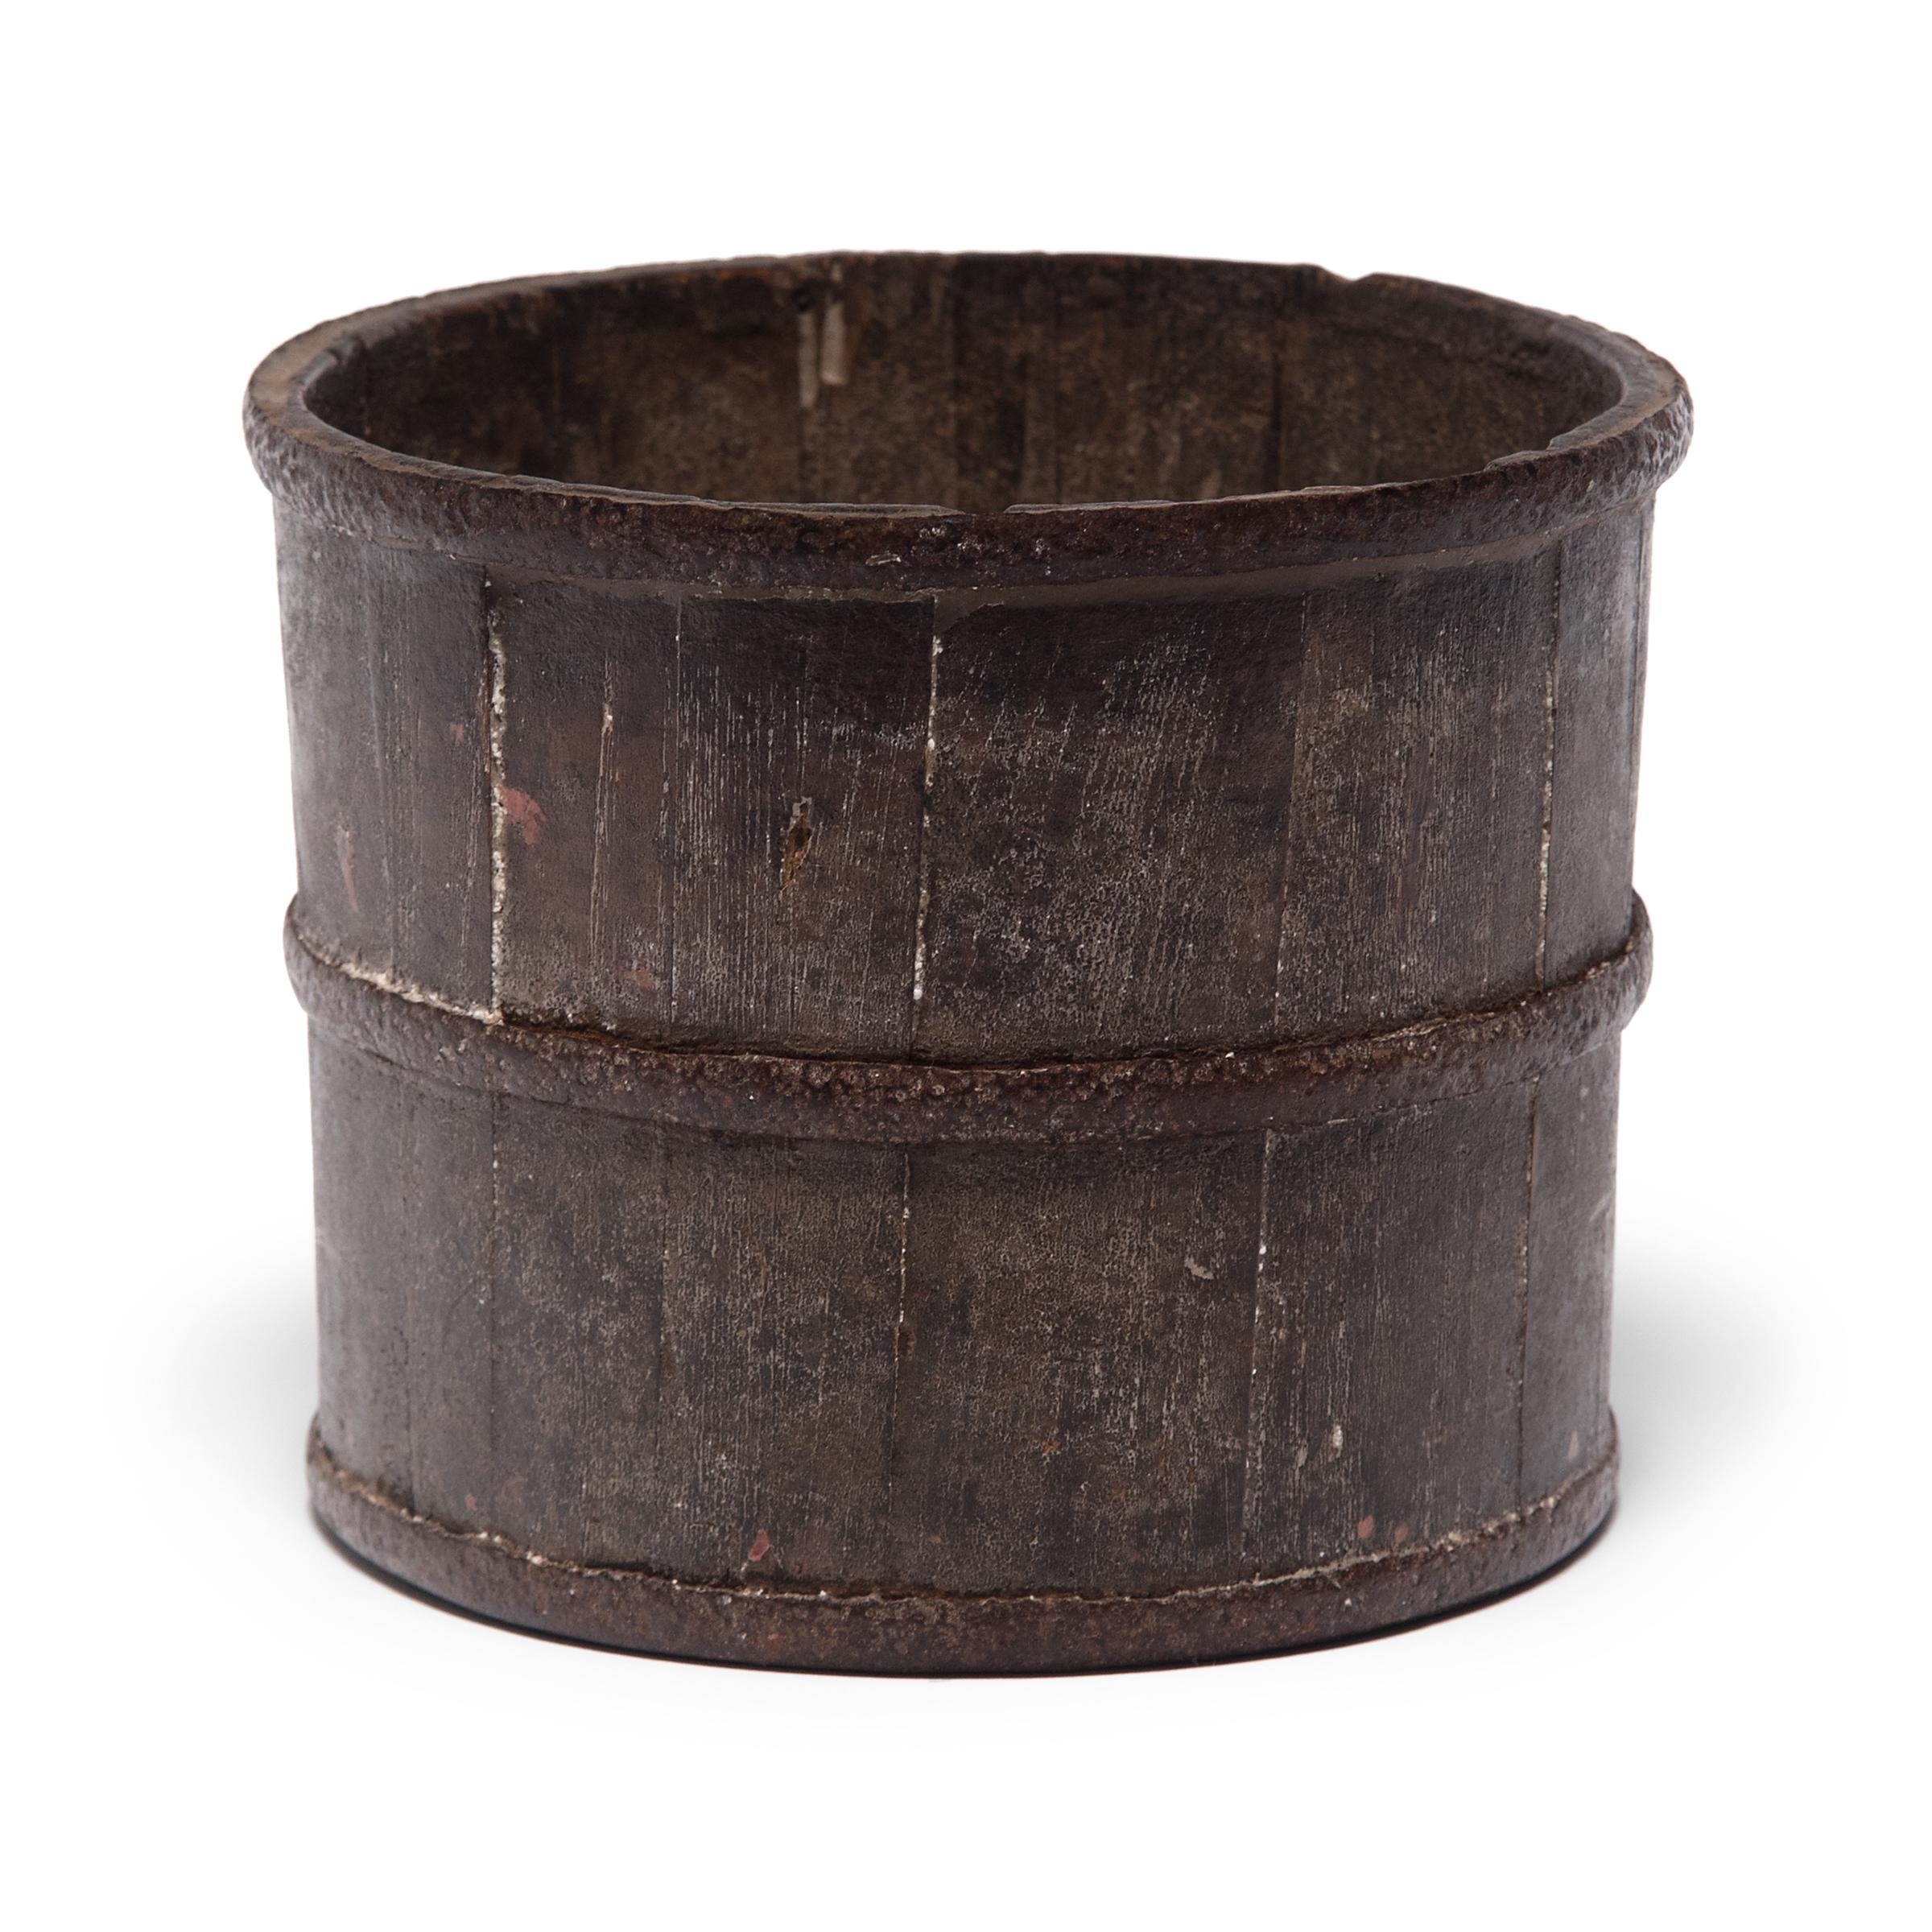 Placed beside his inkpot and insktone, this 19th century brush pot once held select calligraphy brushes in a scholar’s studio. Cloaked in a rich patina, the vessel is simply designed with finely joined pinewood slats held together by hand-smithed